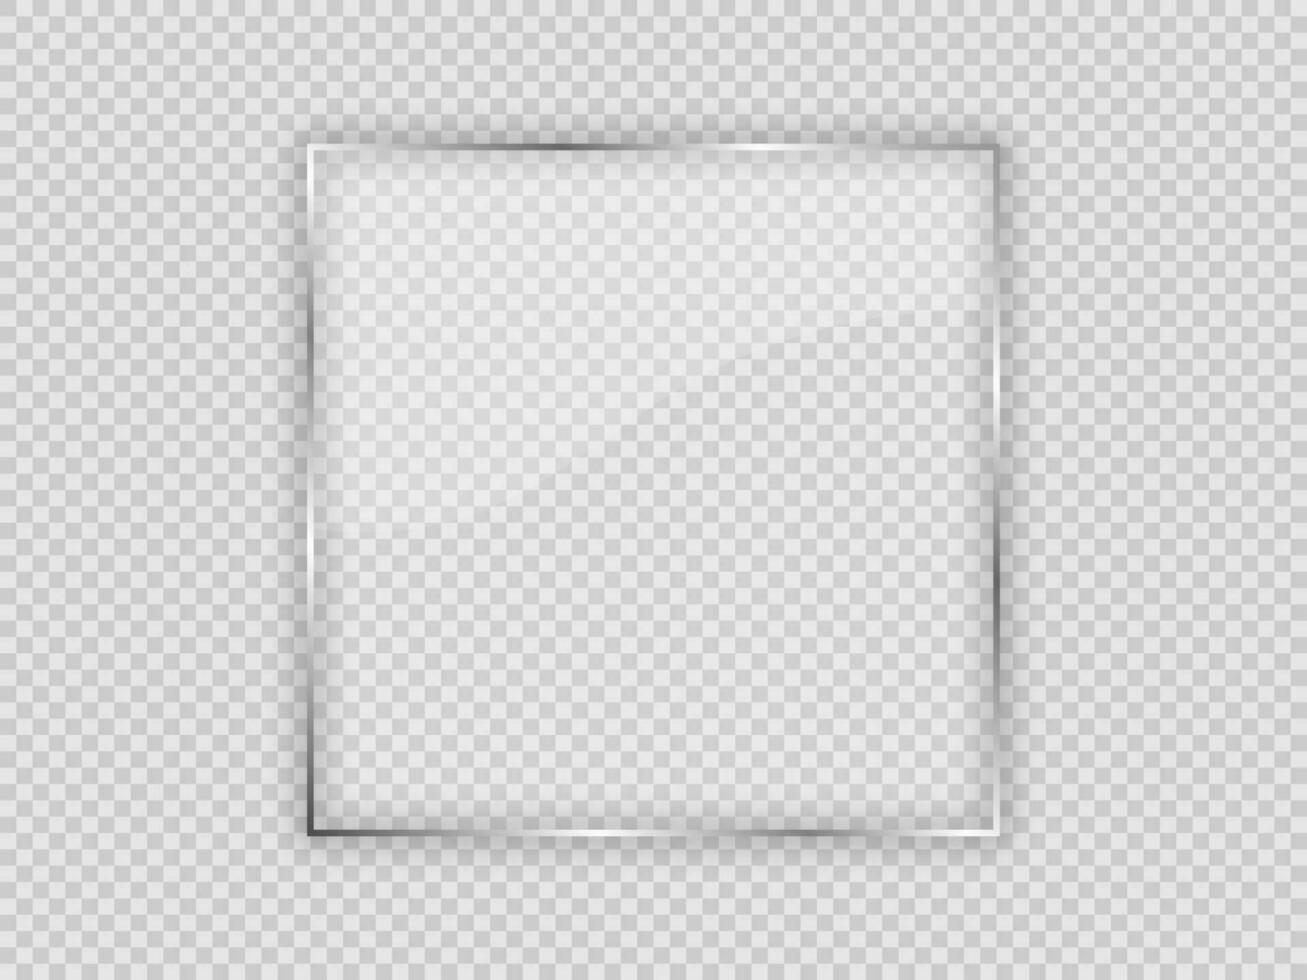 Glass plate in square frame vector